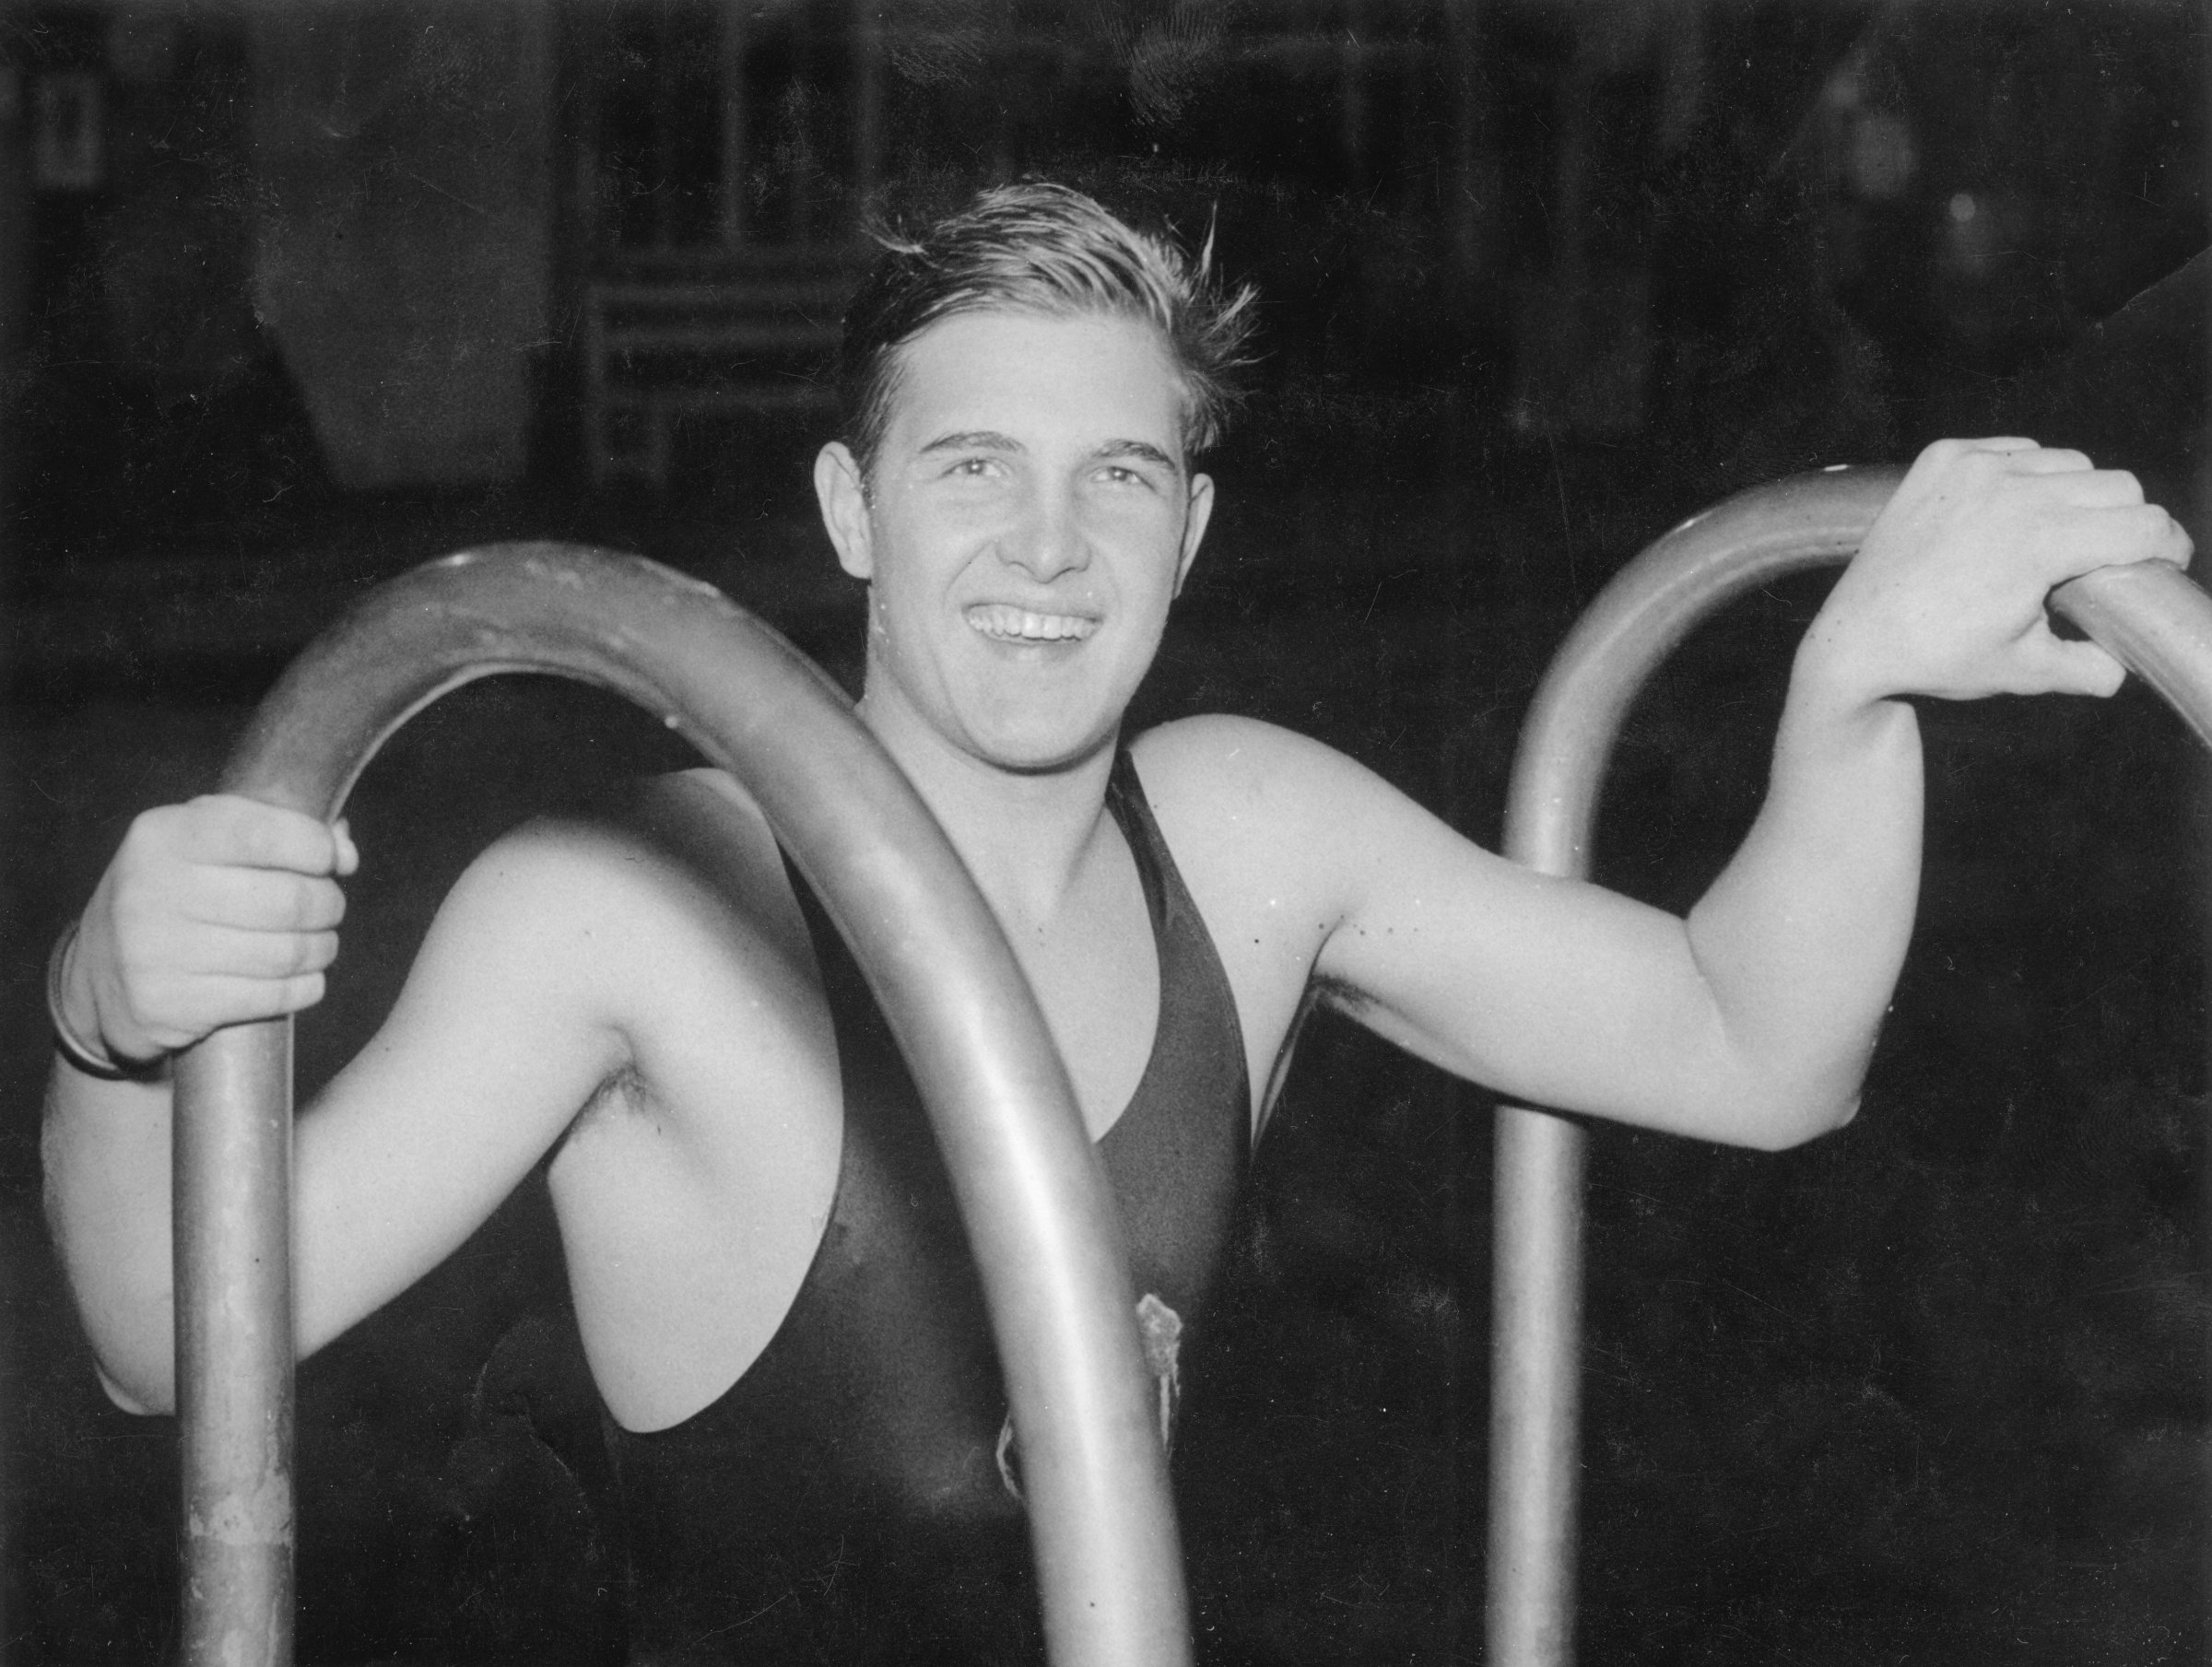 The American Swimmer Adolph Kiefer At A Swimming Competition In Vienna Diana Bath. 6Th November 1935. Photograph.